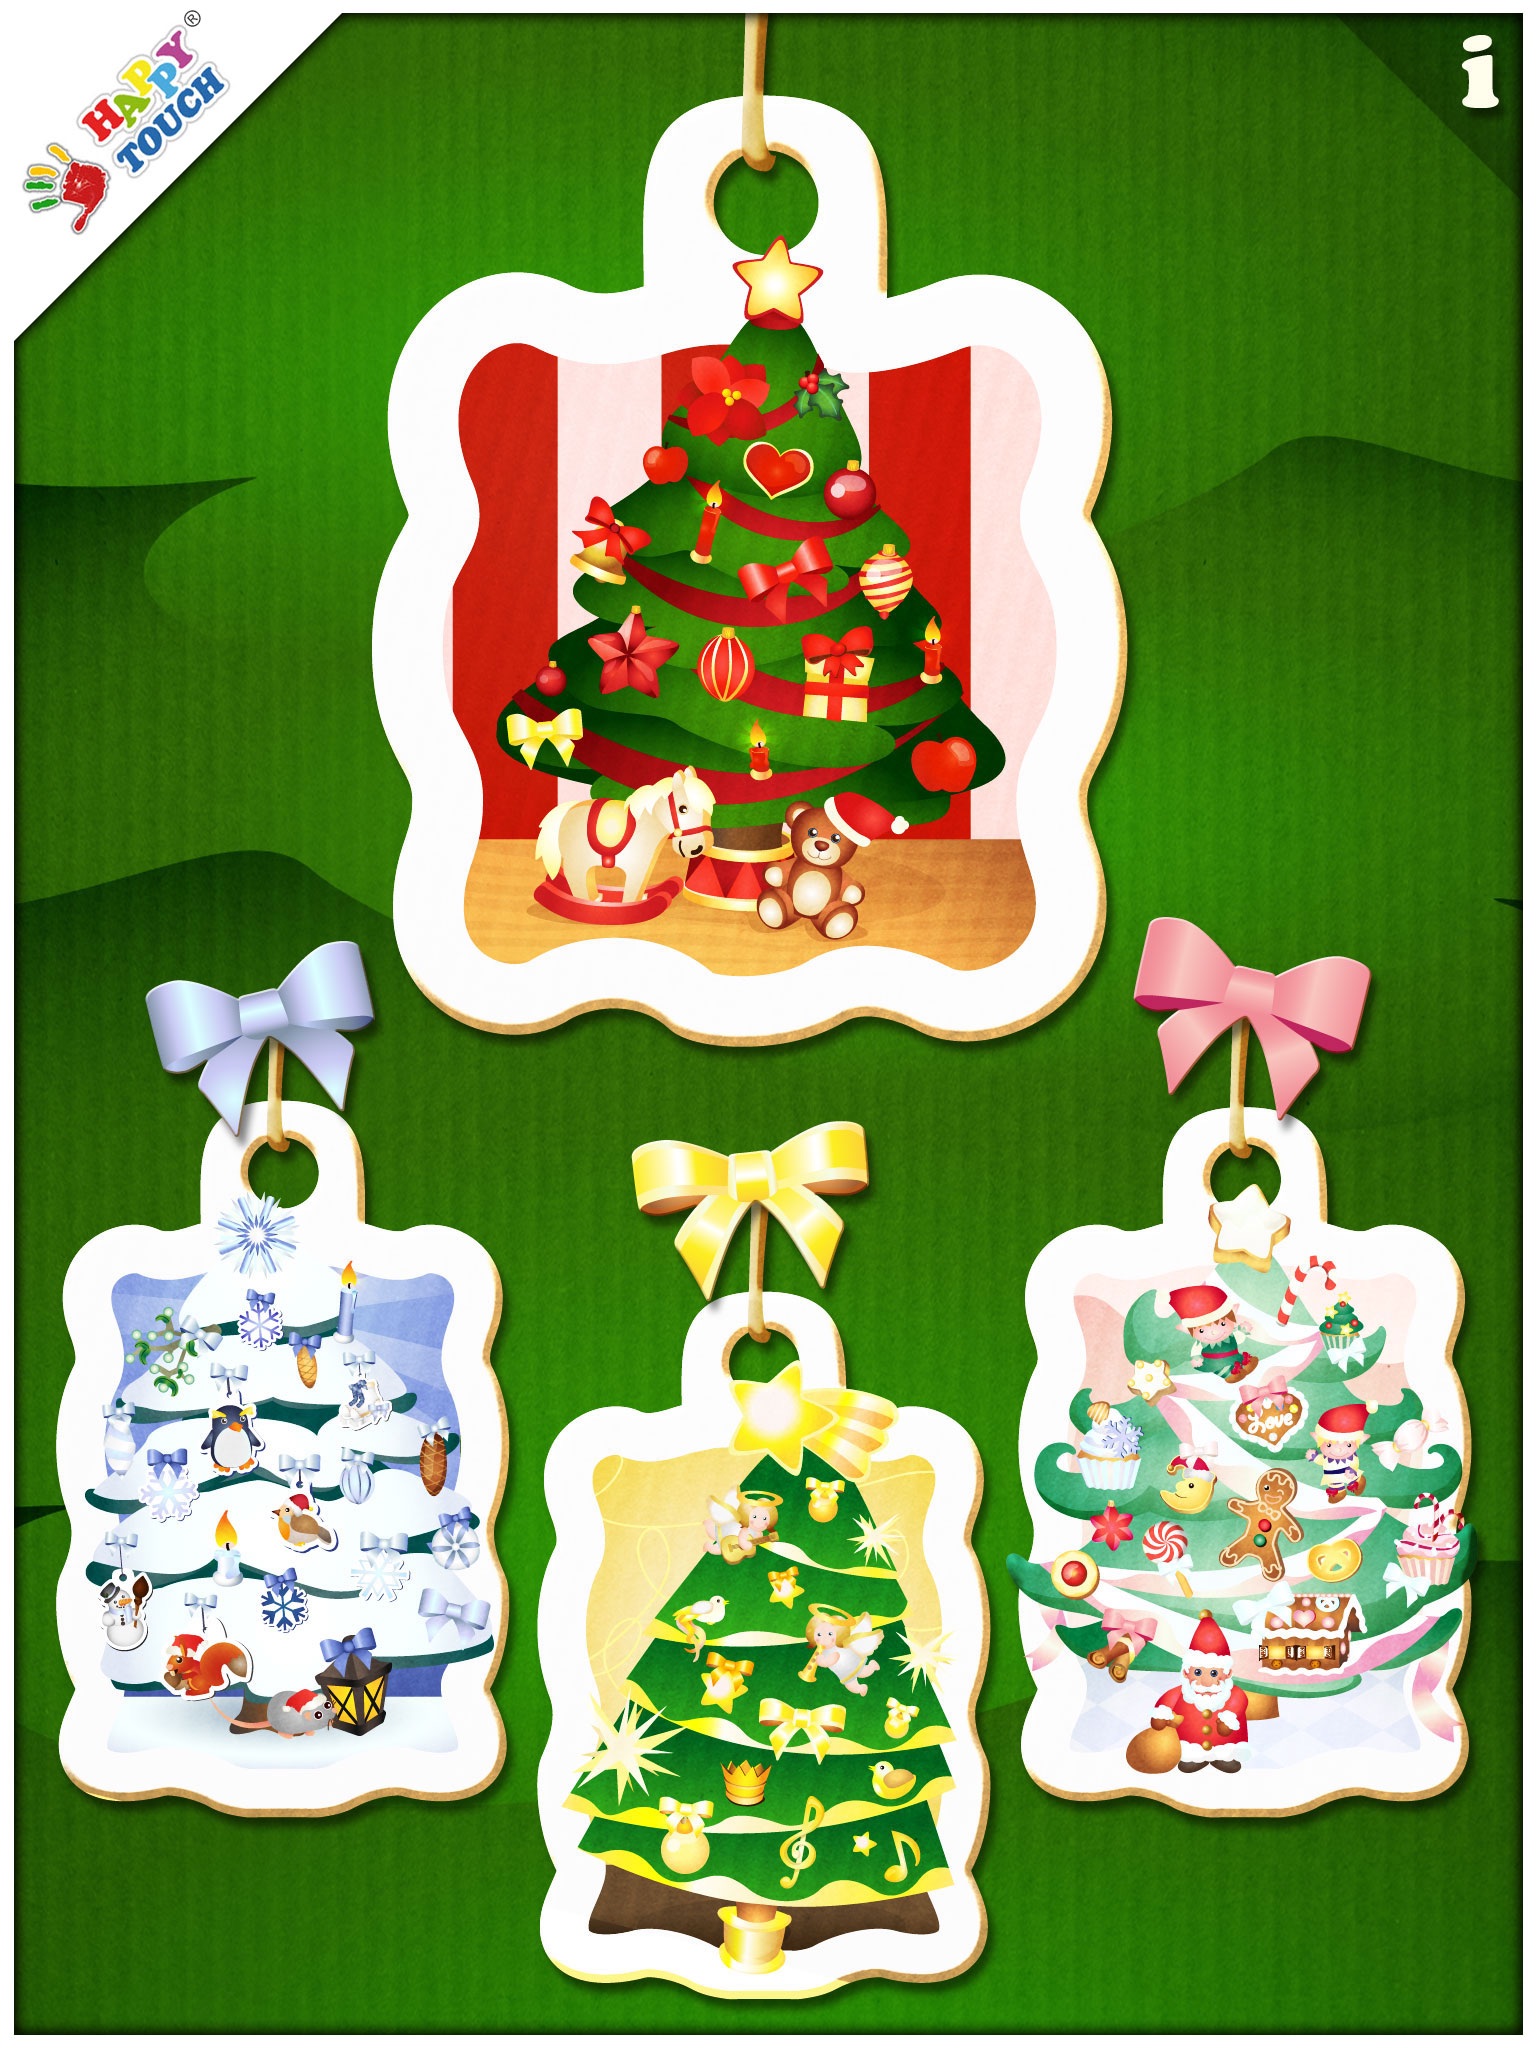 Christmas Tree Decorating for kids (by Happy Touch) screenshot 4